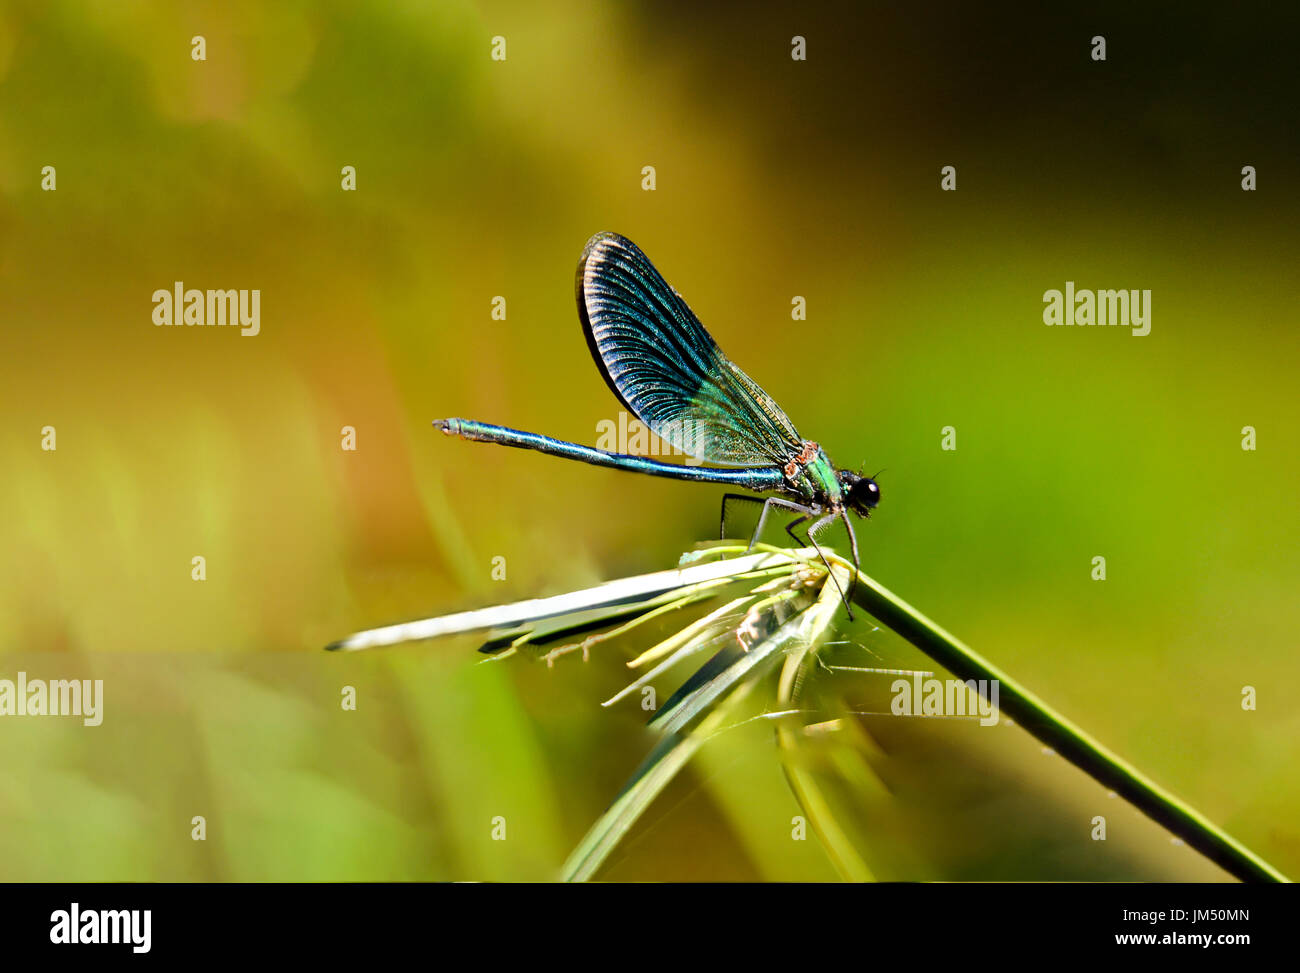 Dragonfly resting on plant Banque D'Images